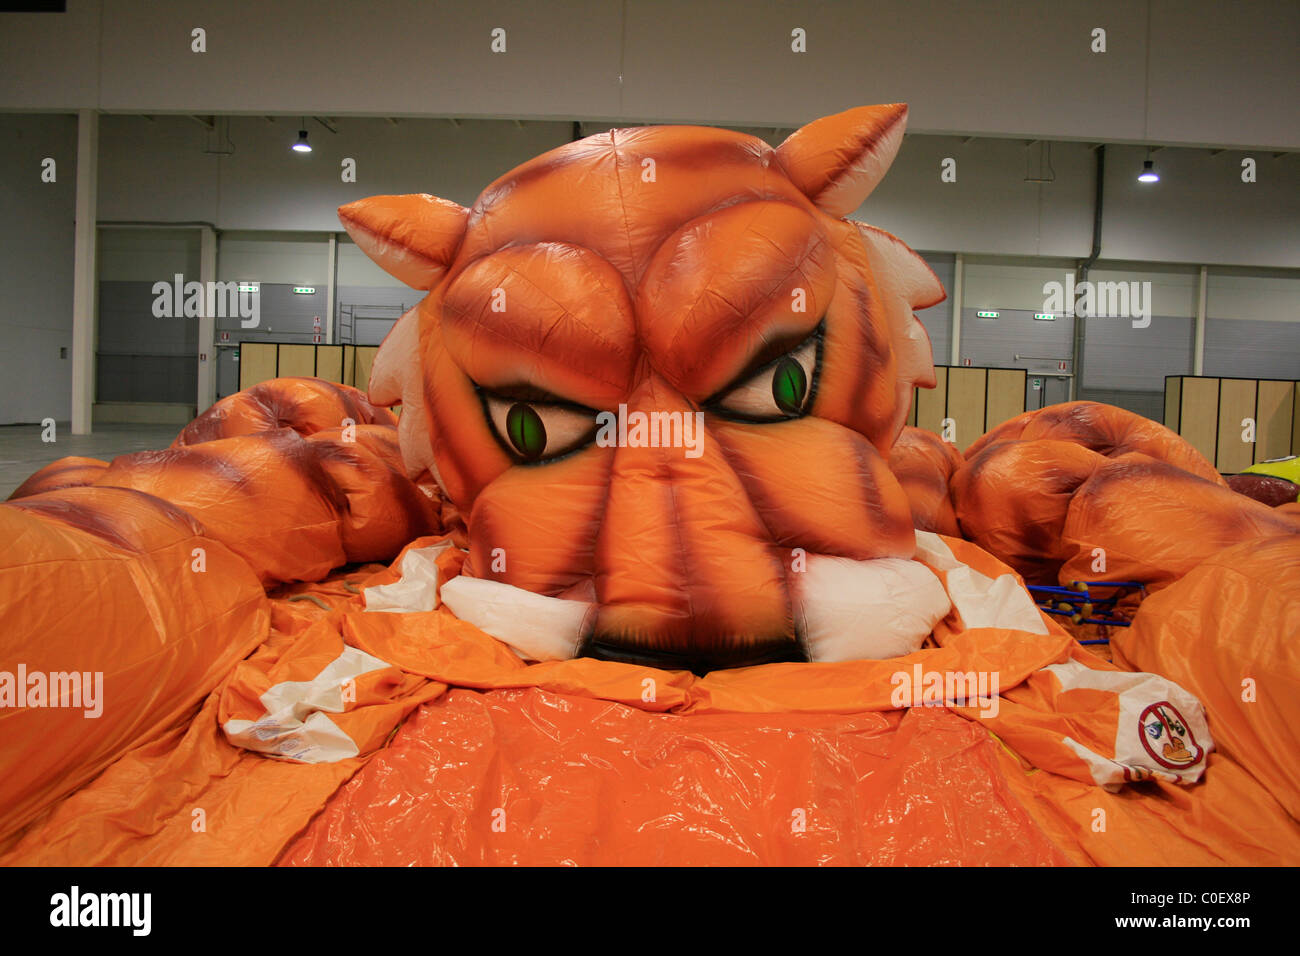 deflated tiger bouncy ride at trade event fair Stock Photo